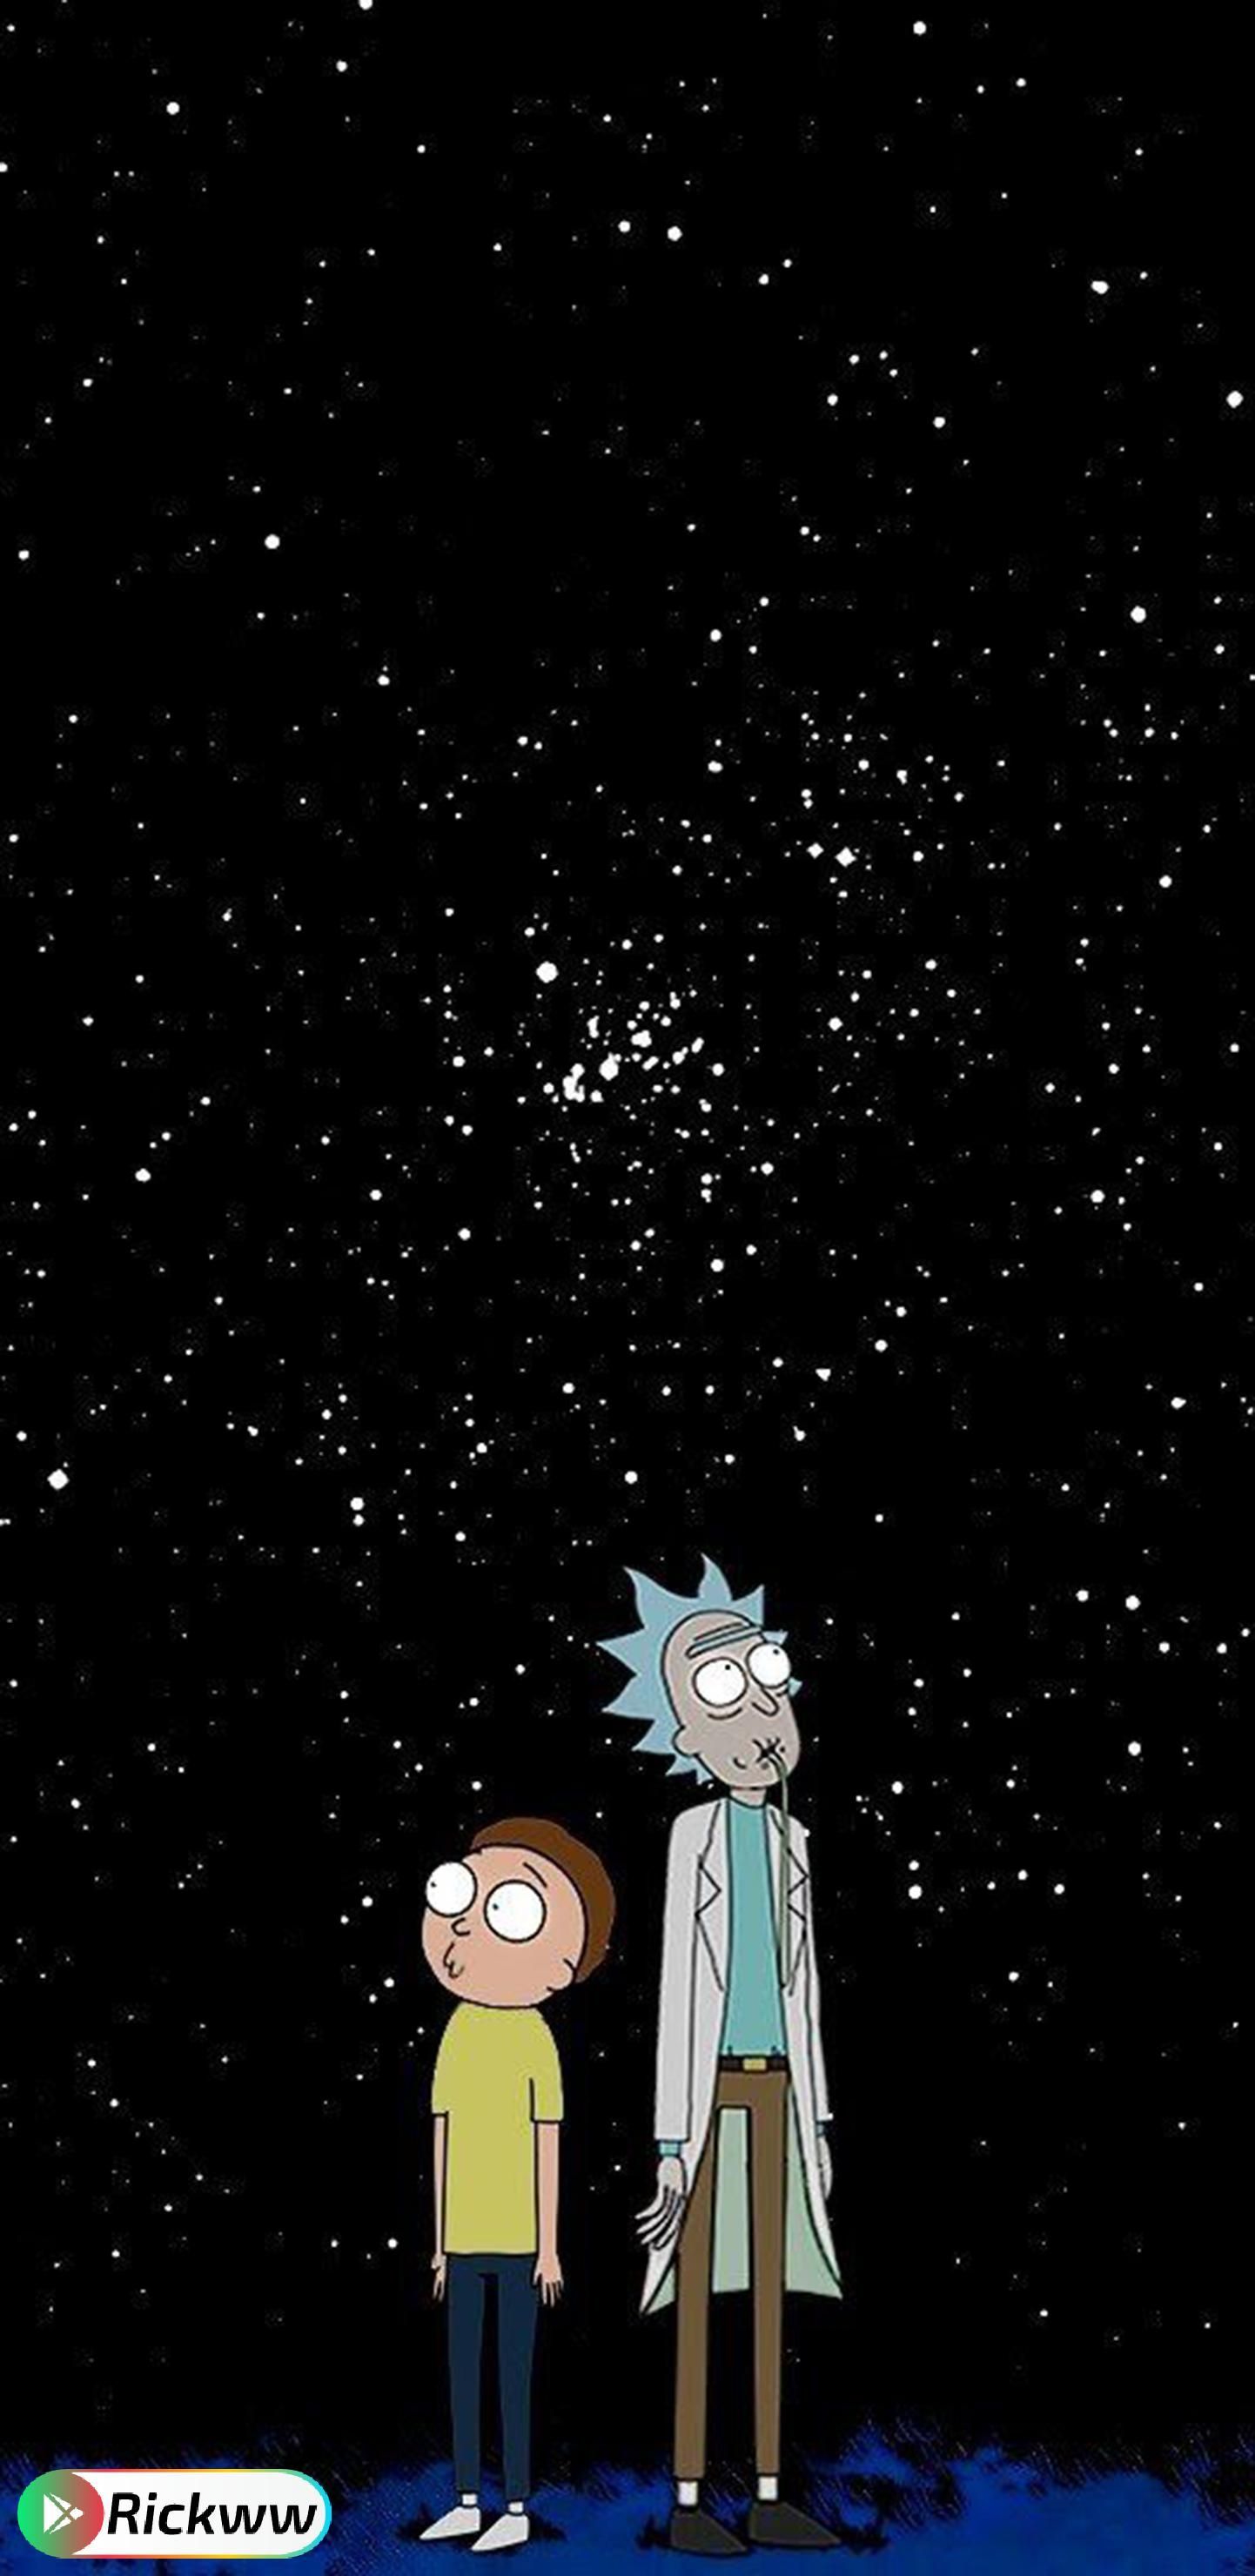 Rick And Morty 4k iPhone Wallpapers - Wallpaper Cave